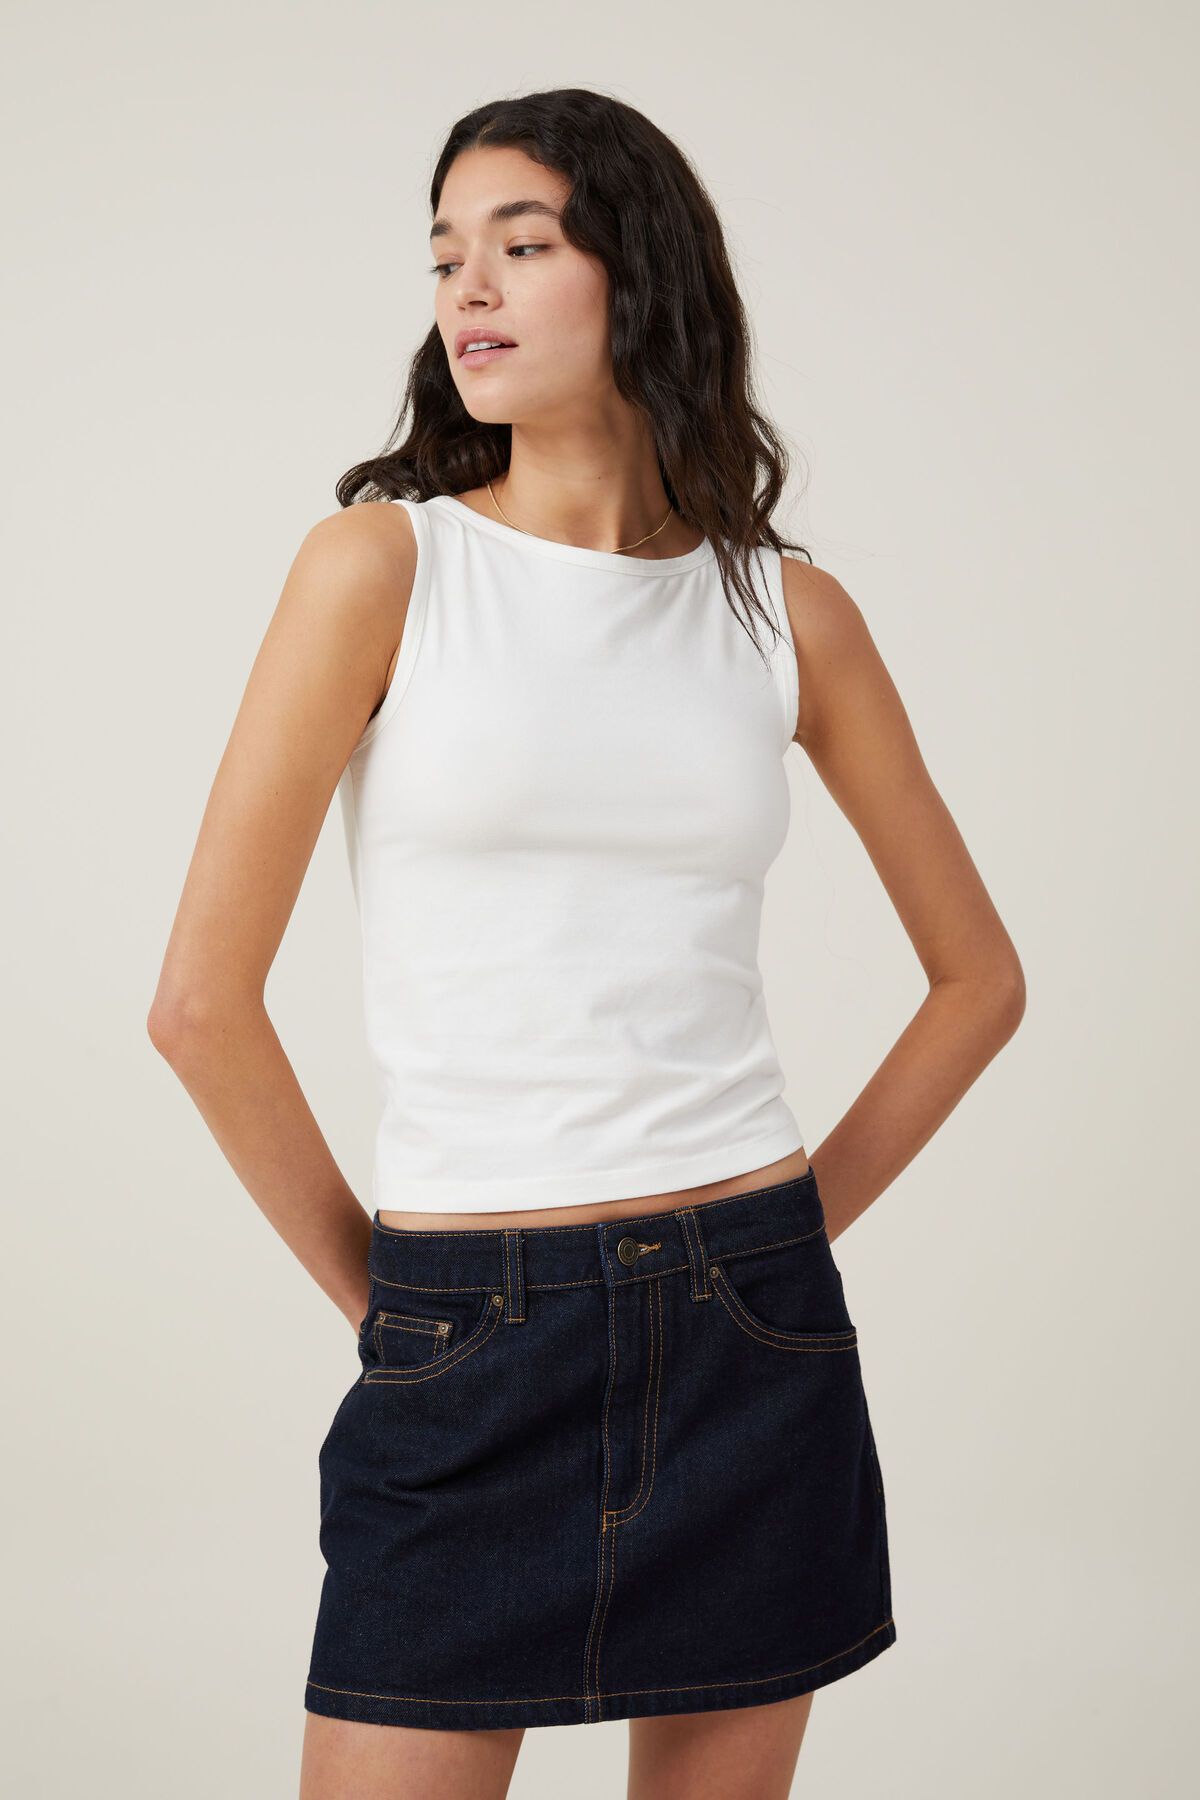 The One Basic Boat Neck Tank | Cotton On (ANZ)